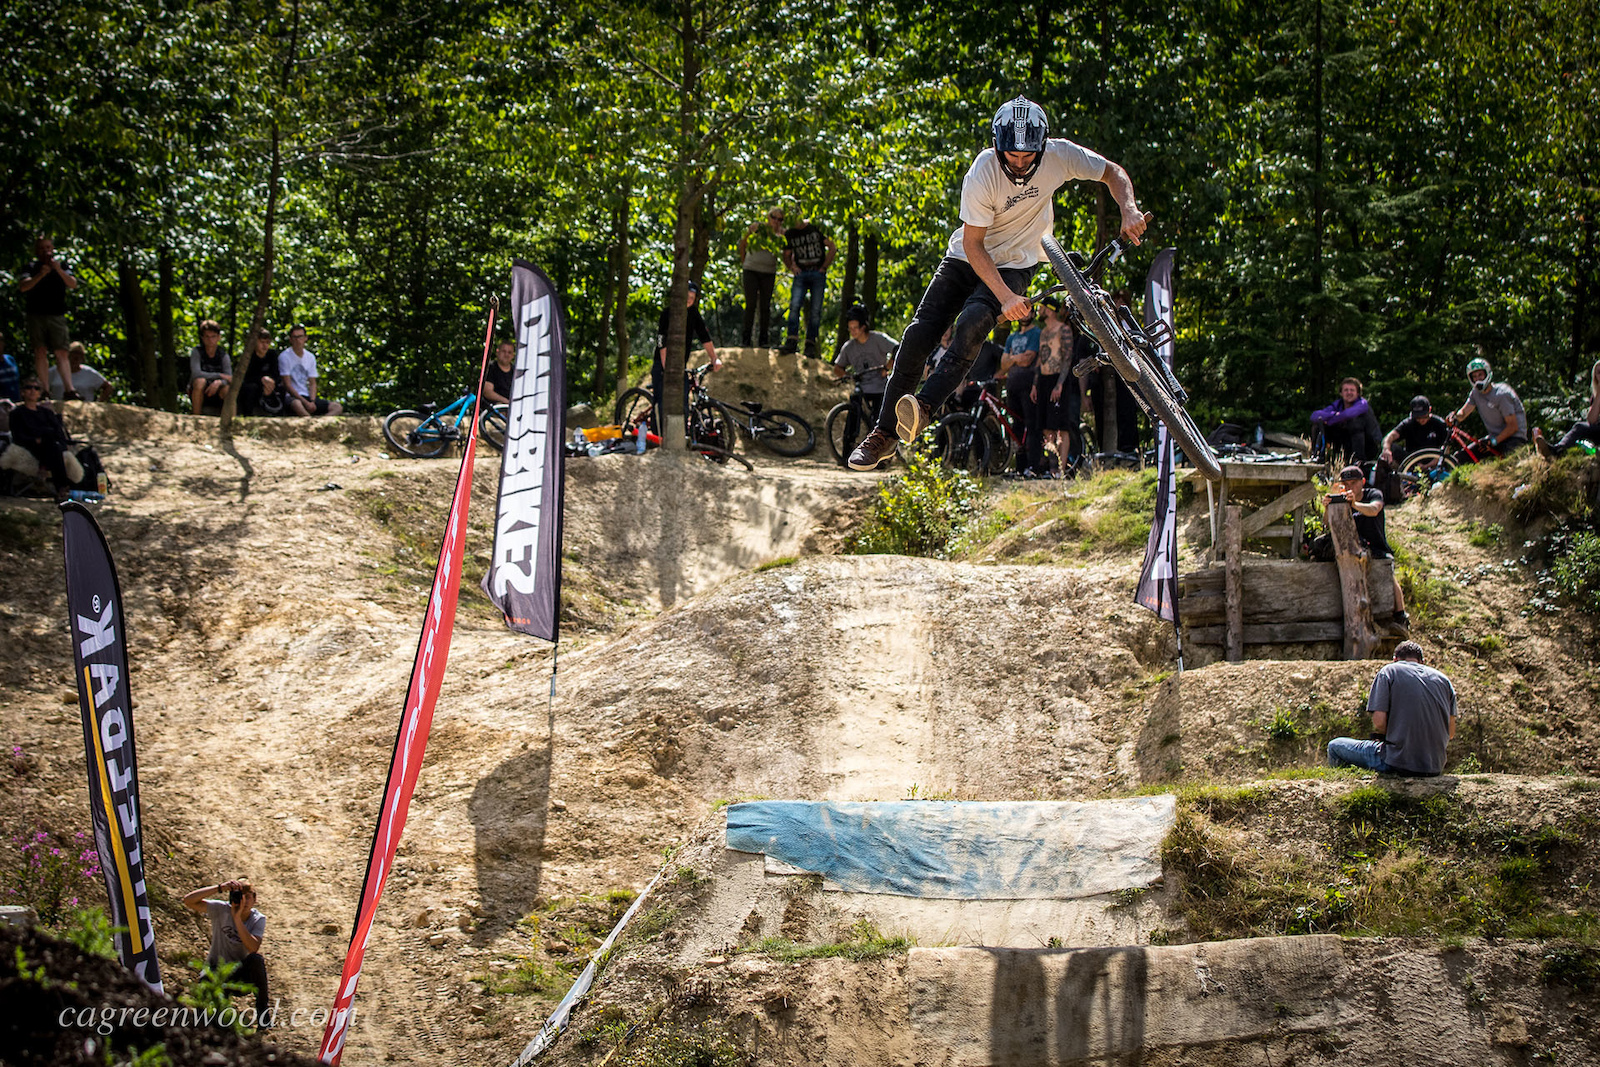 With the same top score as Zac Rainbow, it was Kerry’s consistency to throw down banger runs that earn’t him the top step of the podium today. Here he is boosting a tail whip before setting up for a 3-whip over the last